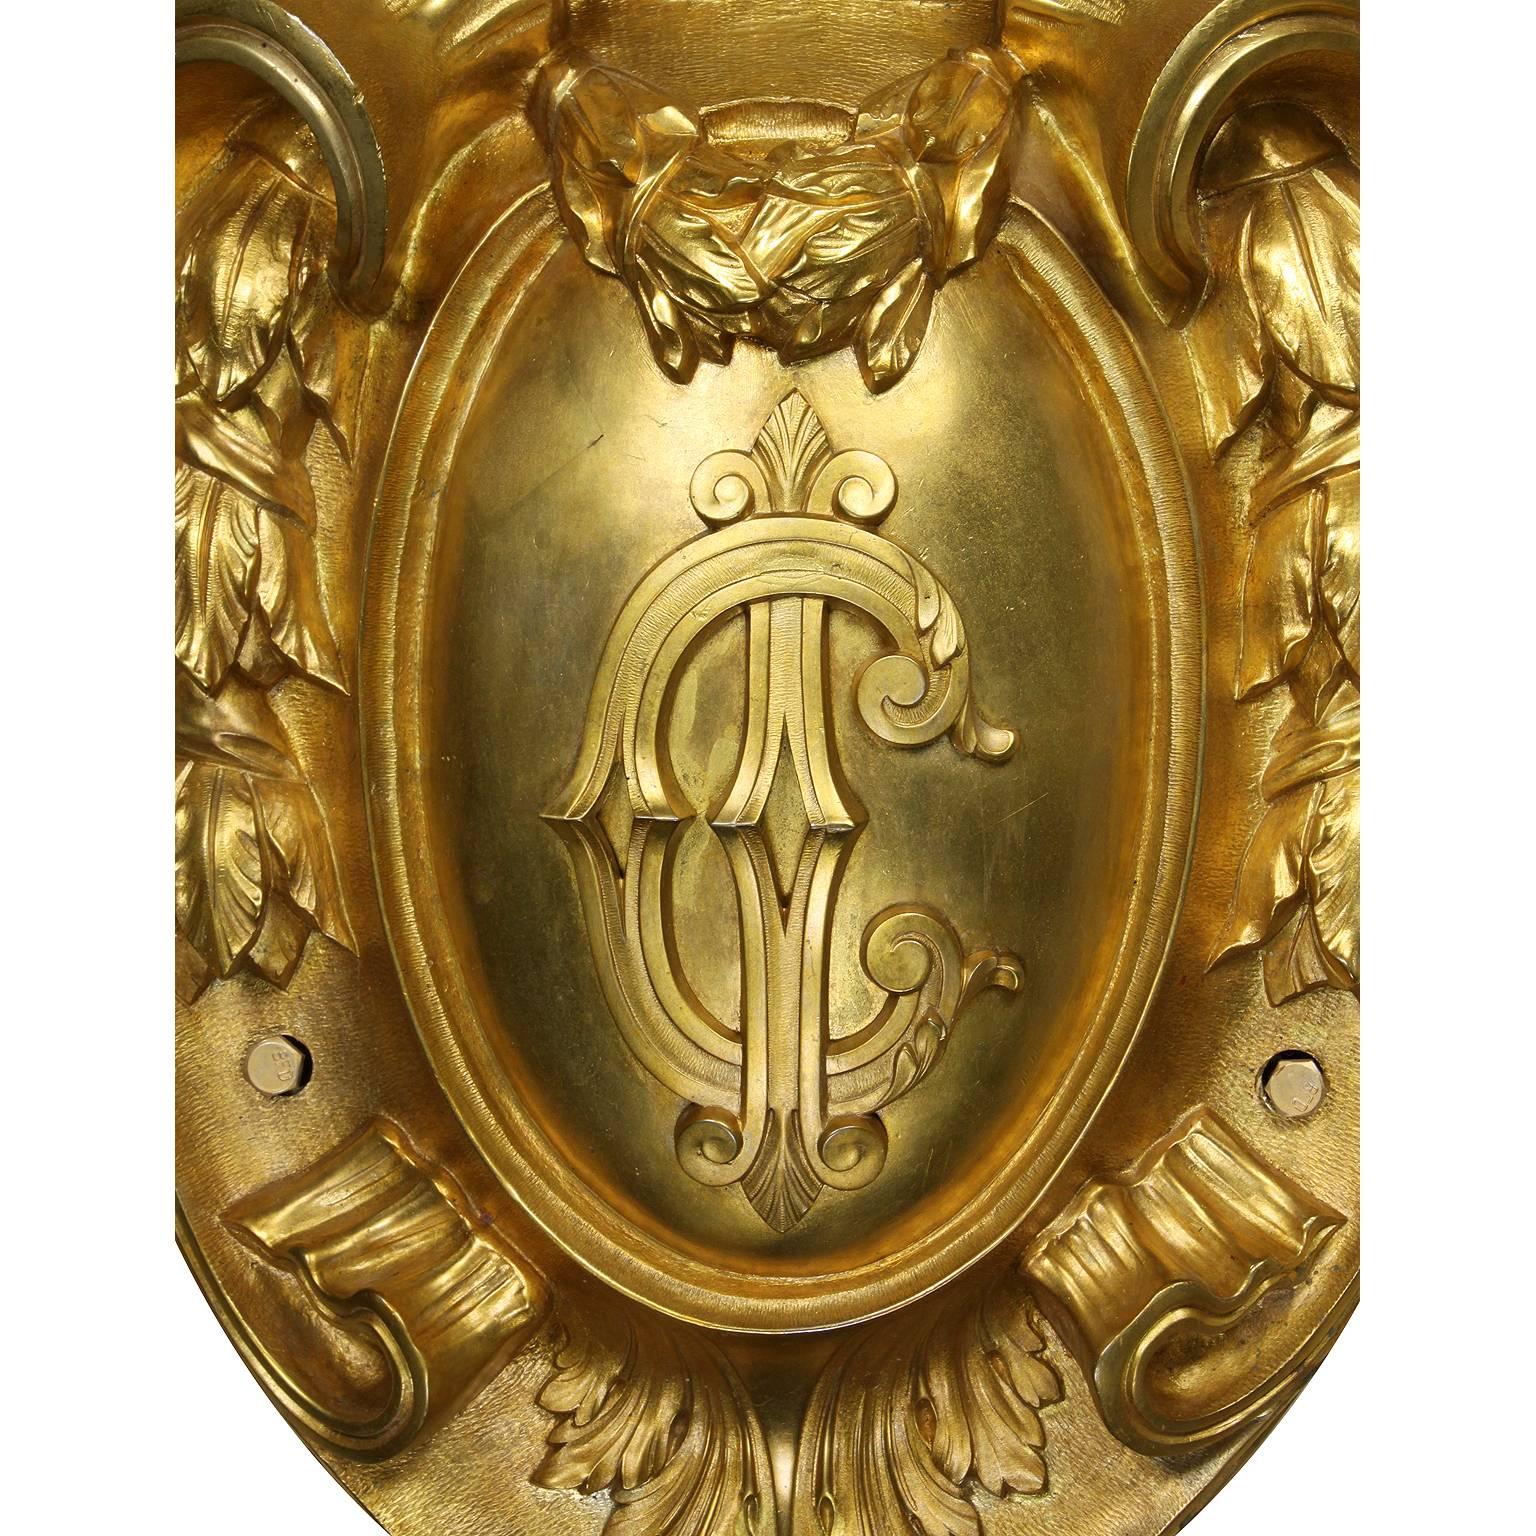 Early 20th Century French Belle Époque 19th/20th Century Gilt-Bronze Three-Light Wall Light, Sconce